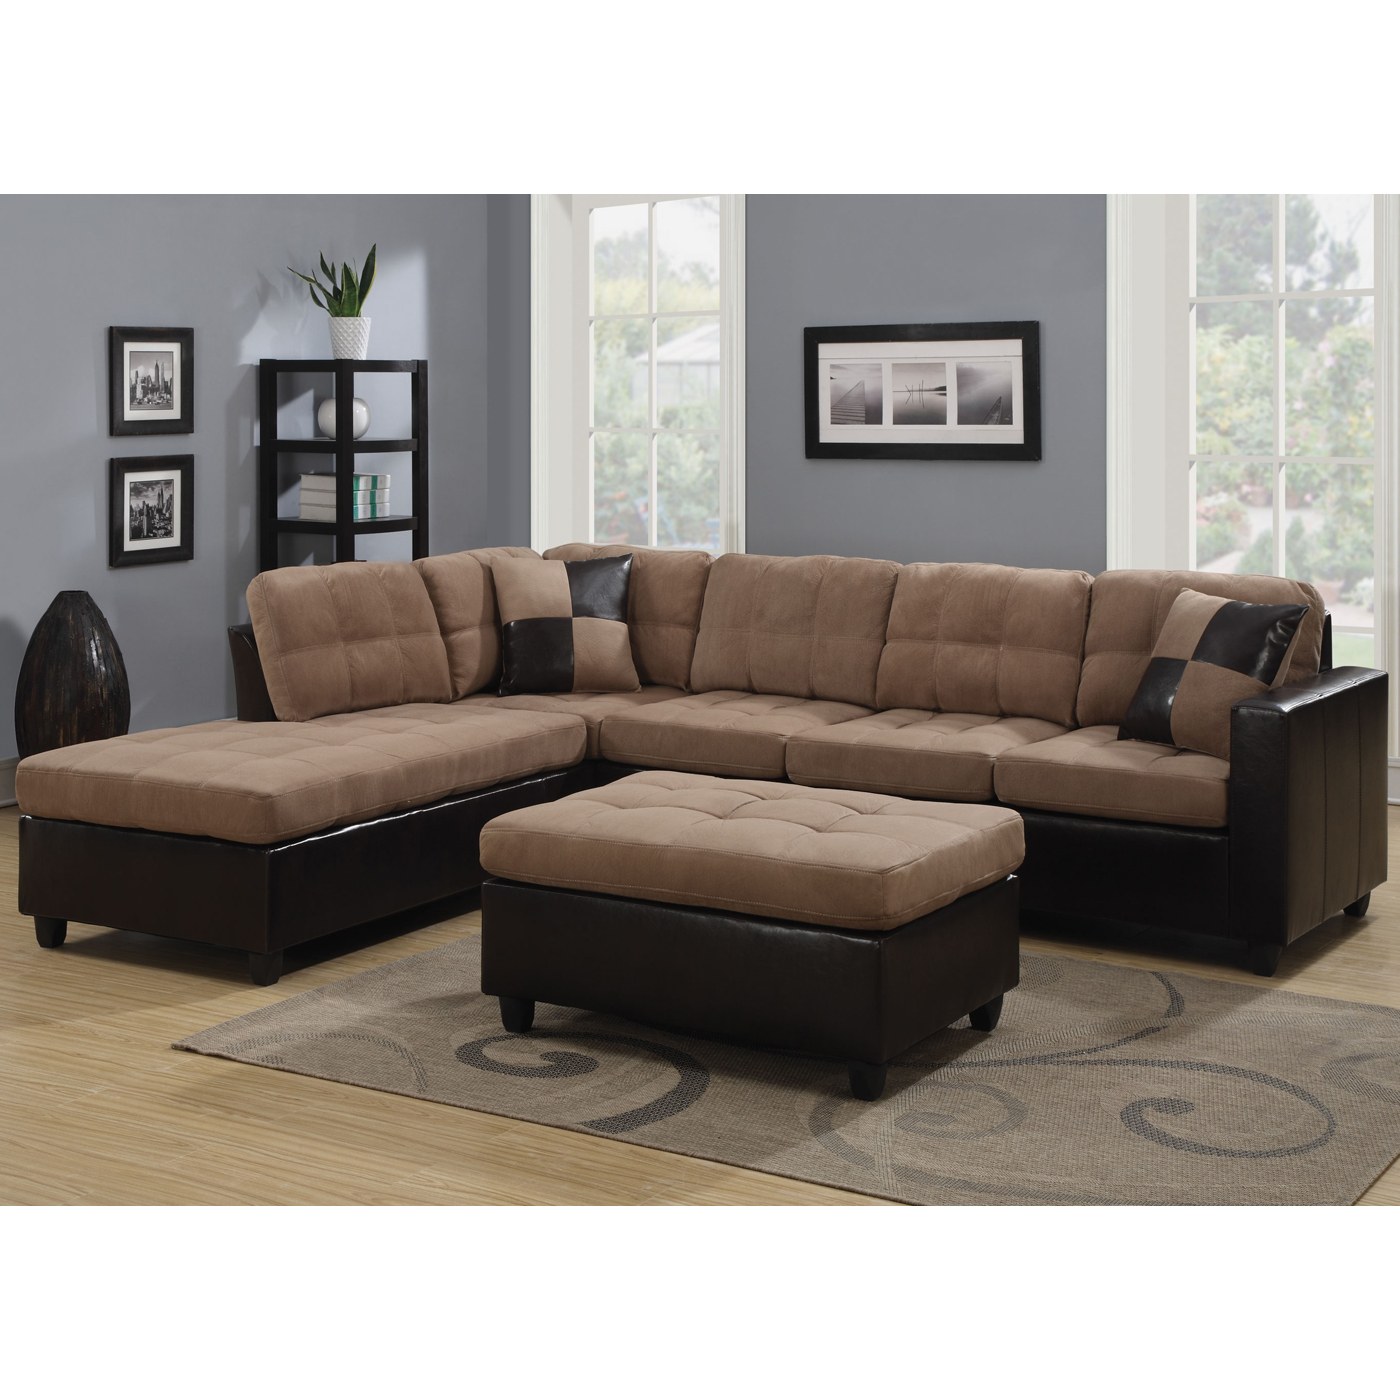 Mallory Microfiber Sectional With Tan